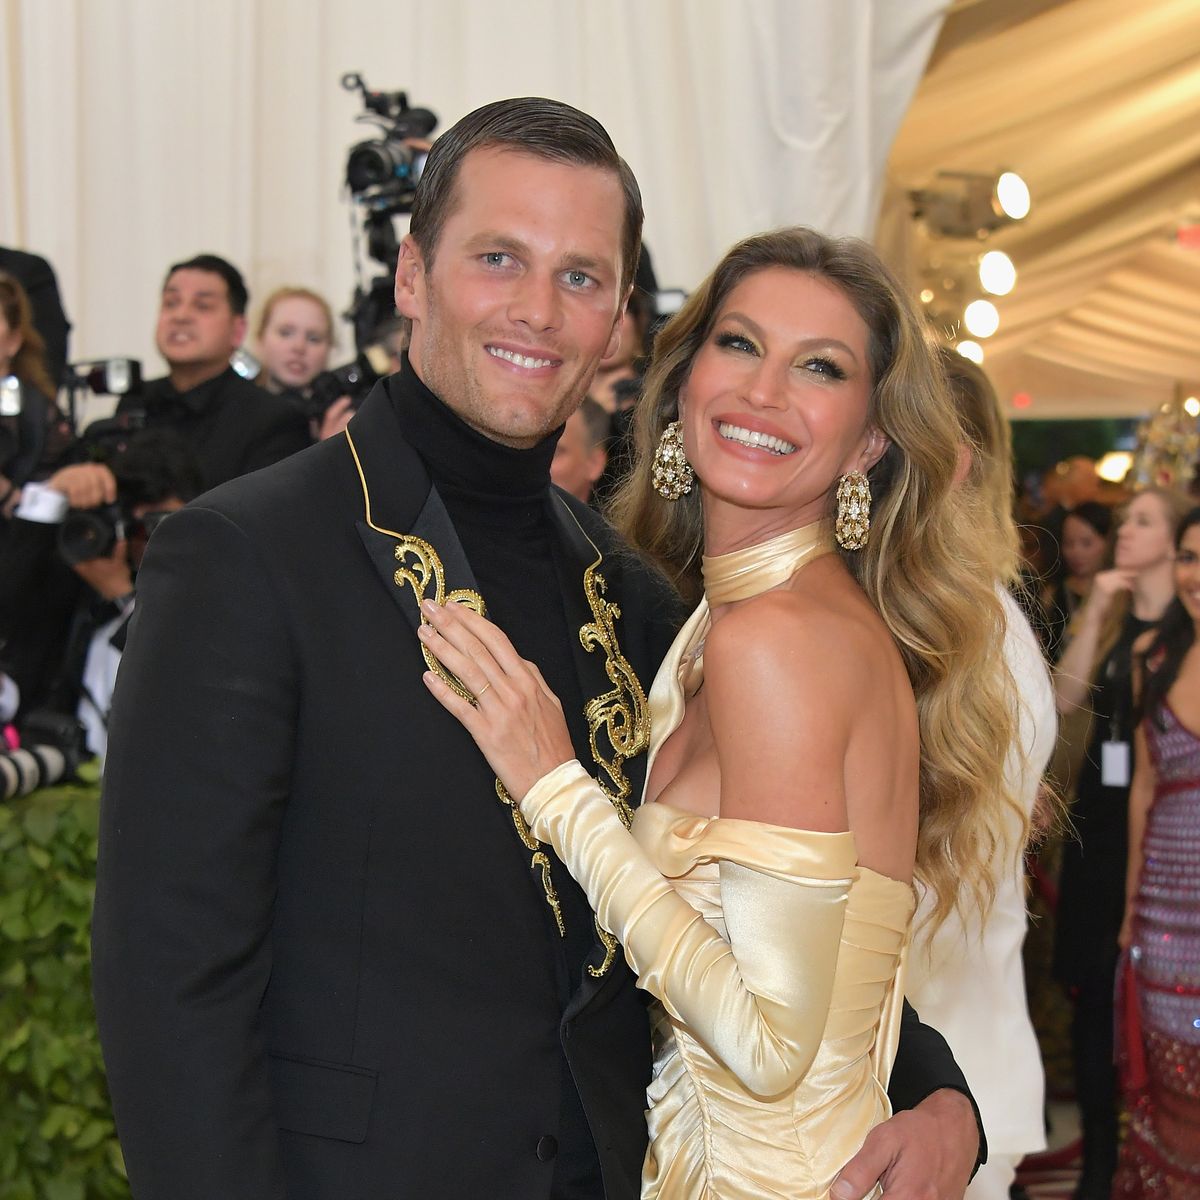 new york, ny   may 07  tom brady and gisele bundchen attends the heavenly bodies fashion  the catholic imagination costume institute gala at the metropolitan museum of art on may 7, 2018 in new york city  photo by neilson barnardgetty images